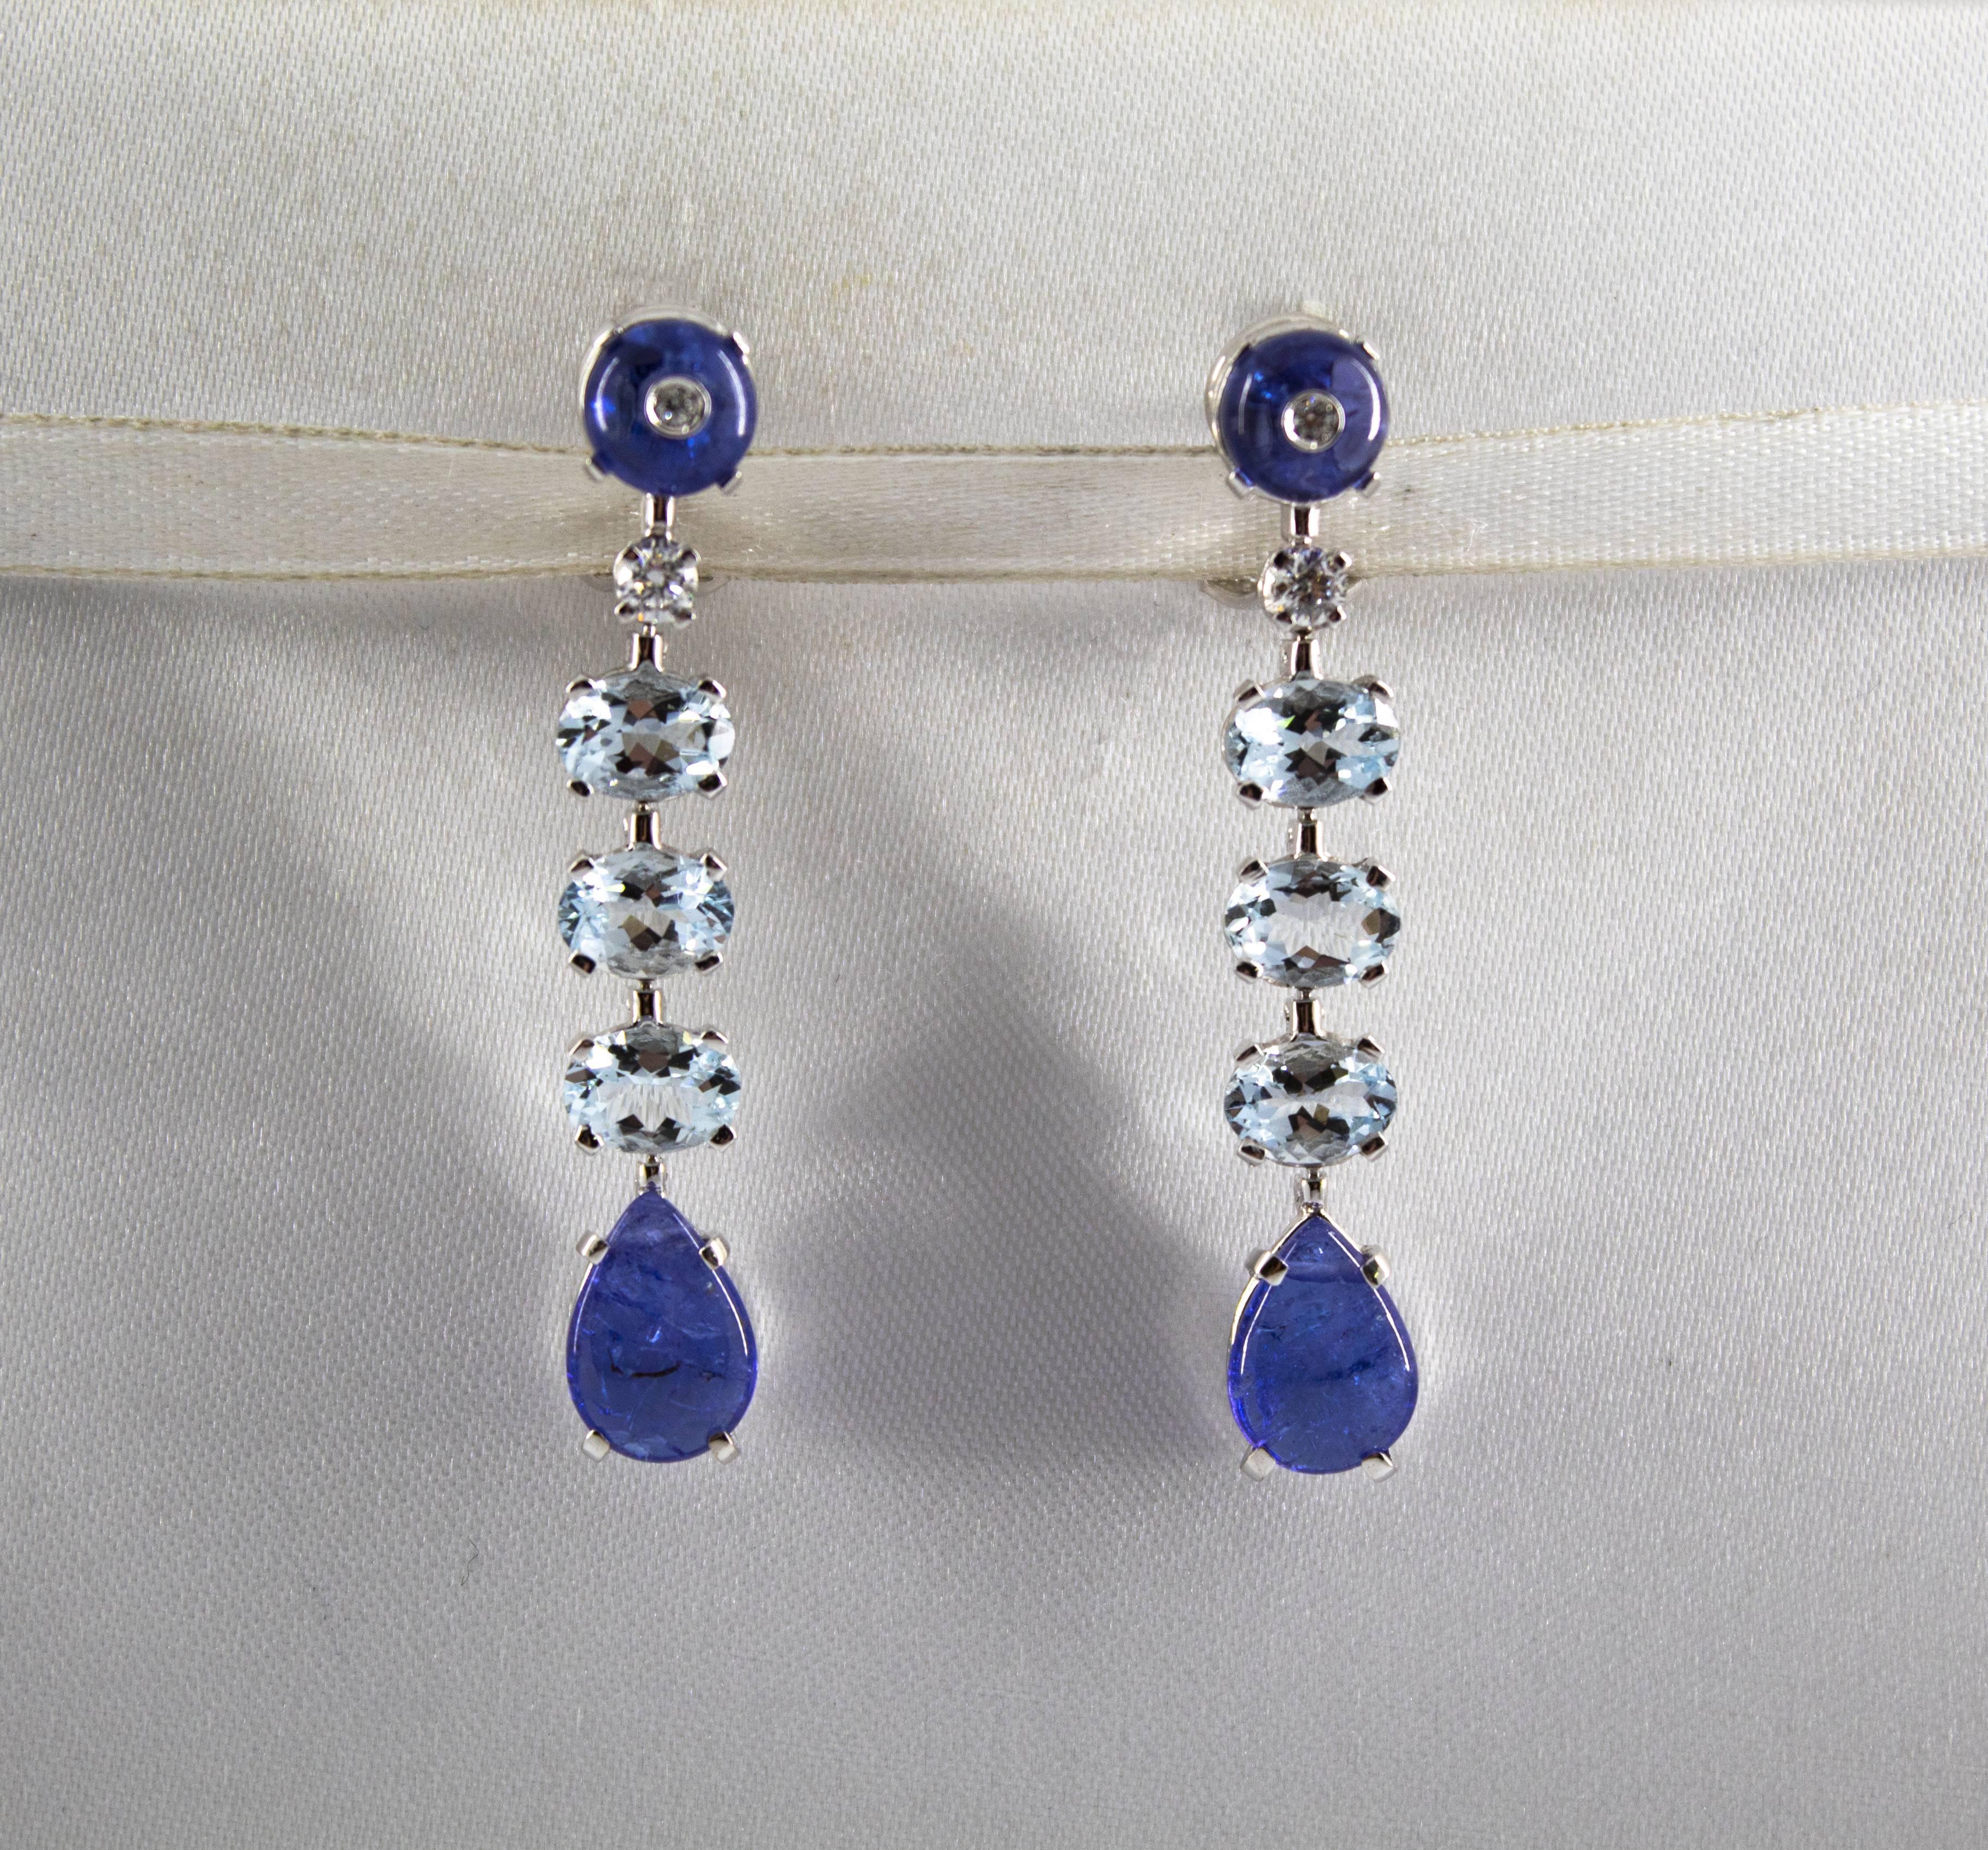 These Earrings are made of 18K White Gold.
These Earrings have 0.24 Carats of White Brilliant Cut Diamonds.
These Earrings have 3.70 Carats of Aquamarine.
These Earrings have 8.70 Carats of Tanzanite.

All our Earrings have pins for pierced ears but